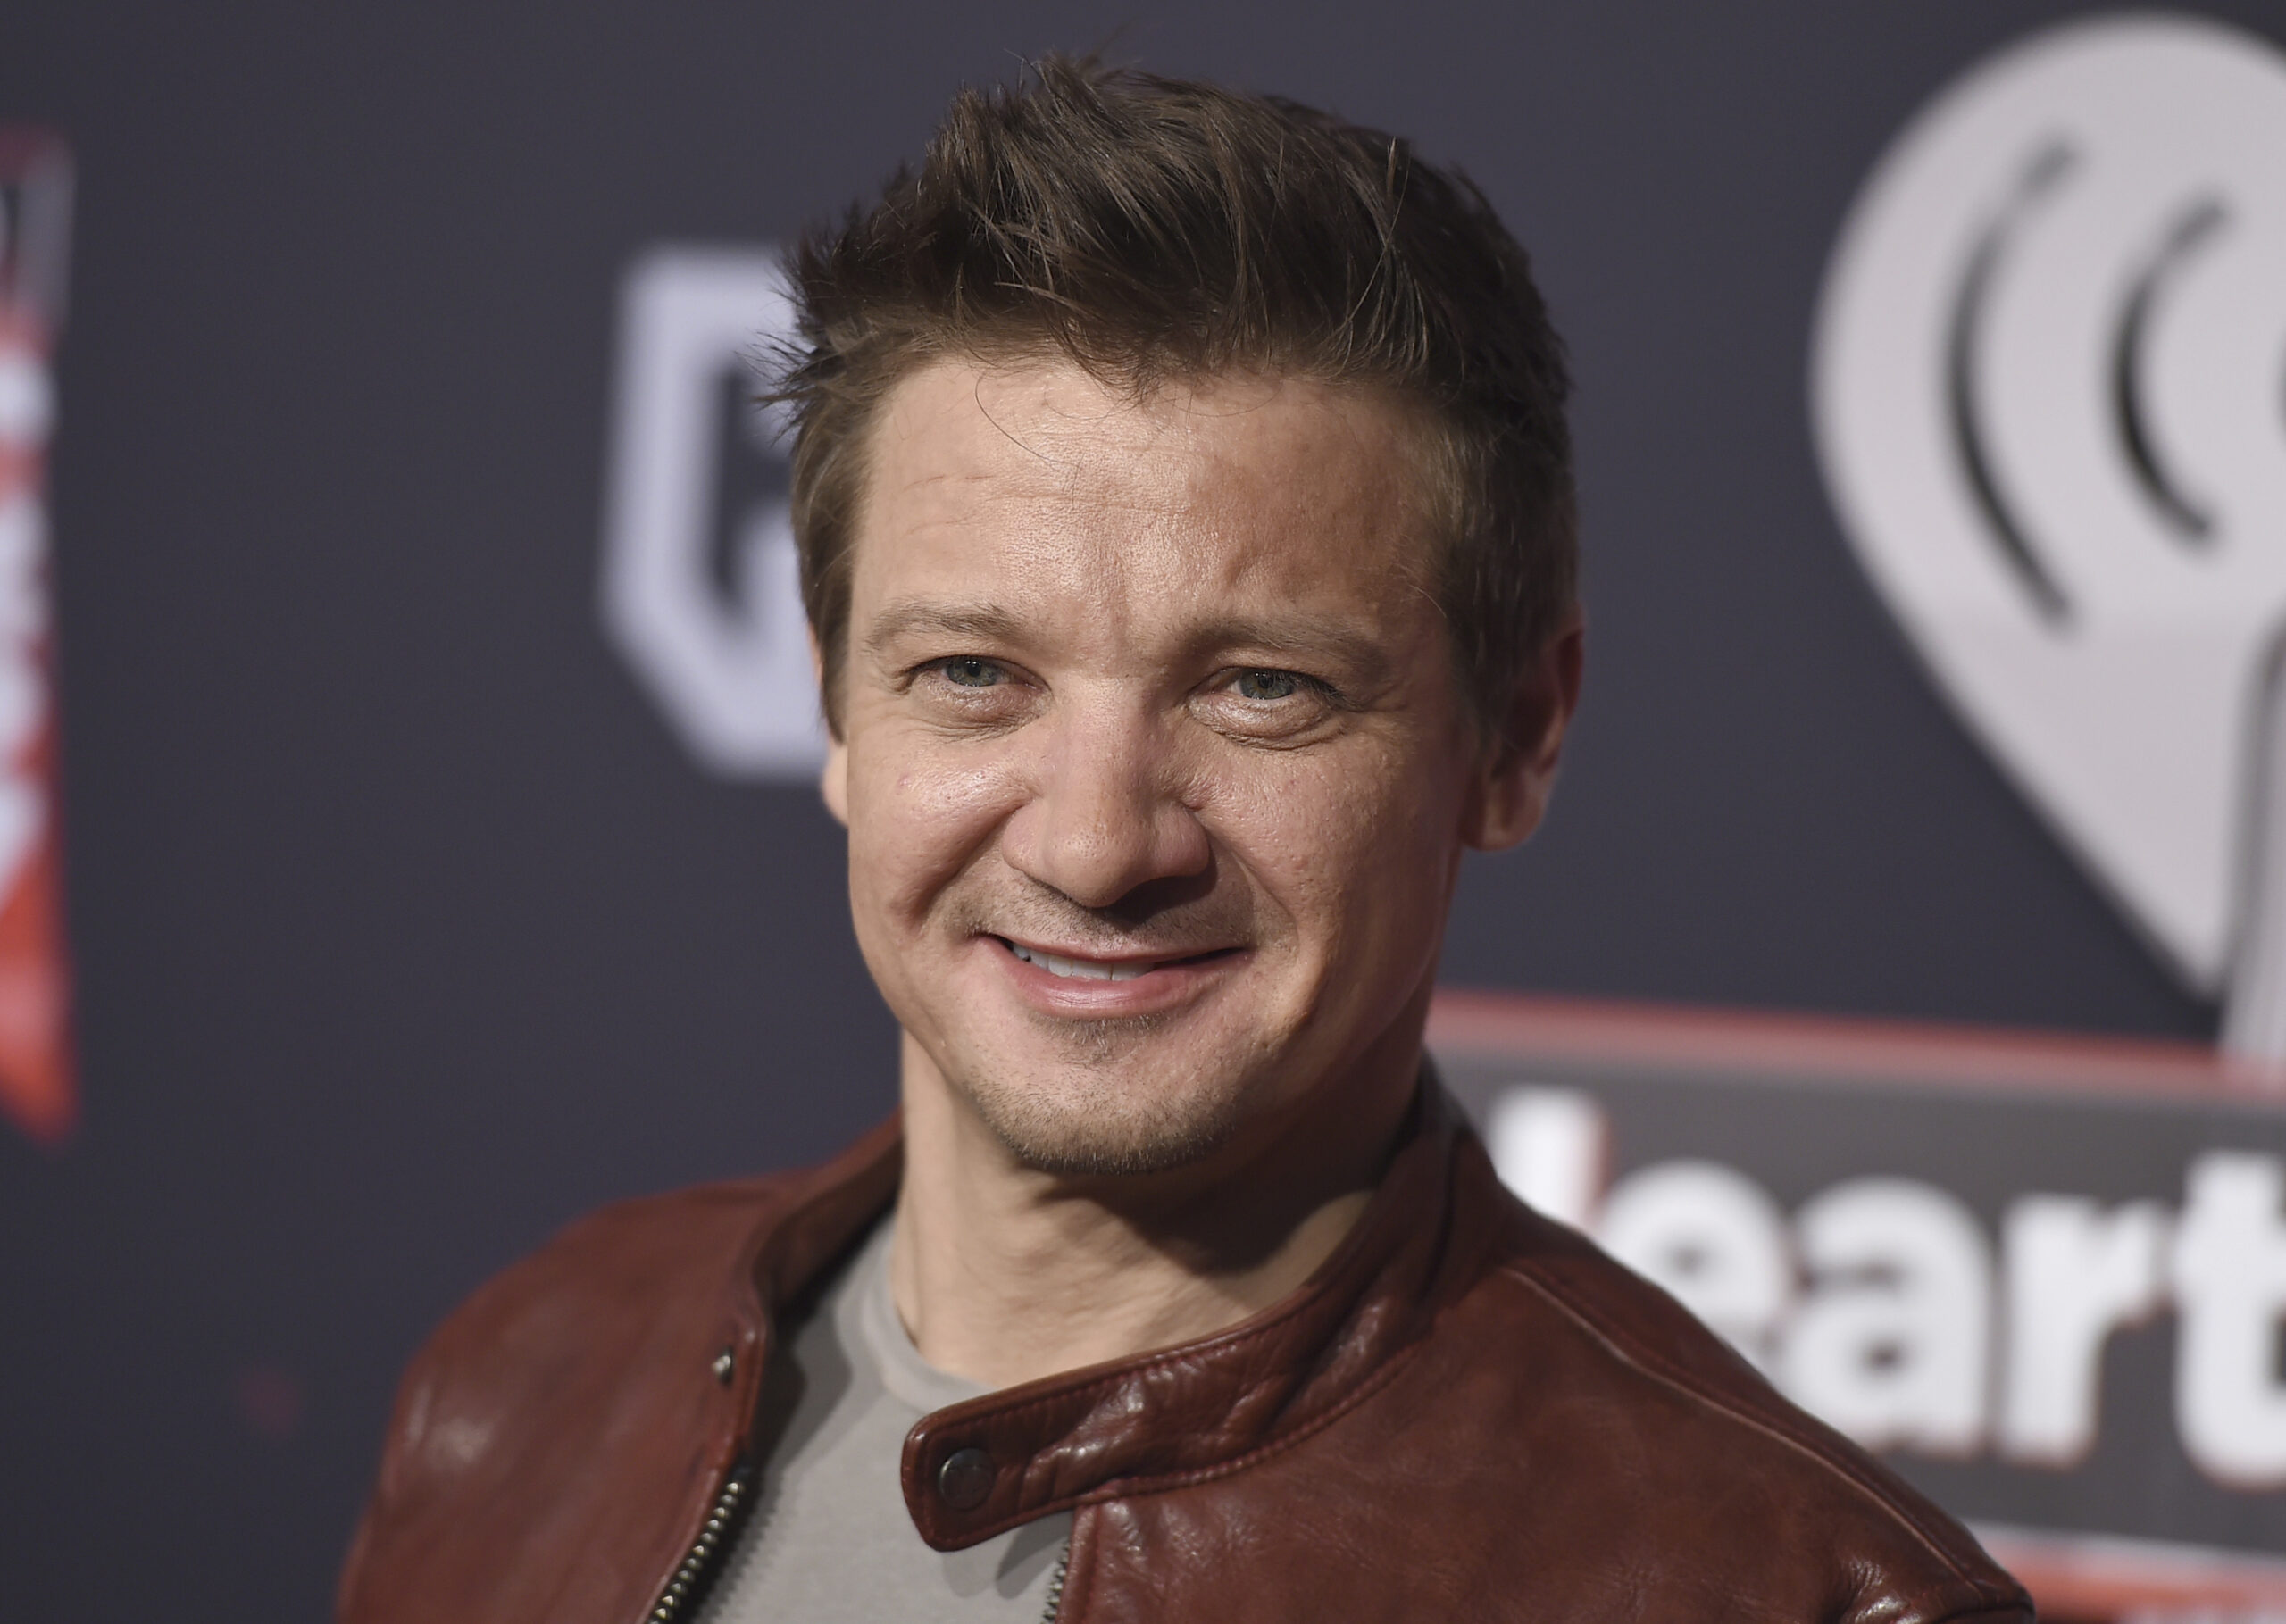 jeremy-renner-shows-on-video-the-scars-from-the-accident-that-almost-cost-him-his-life